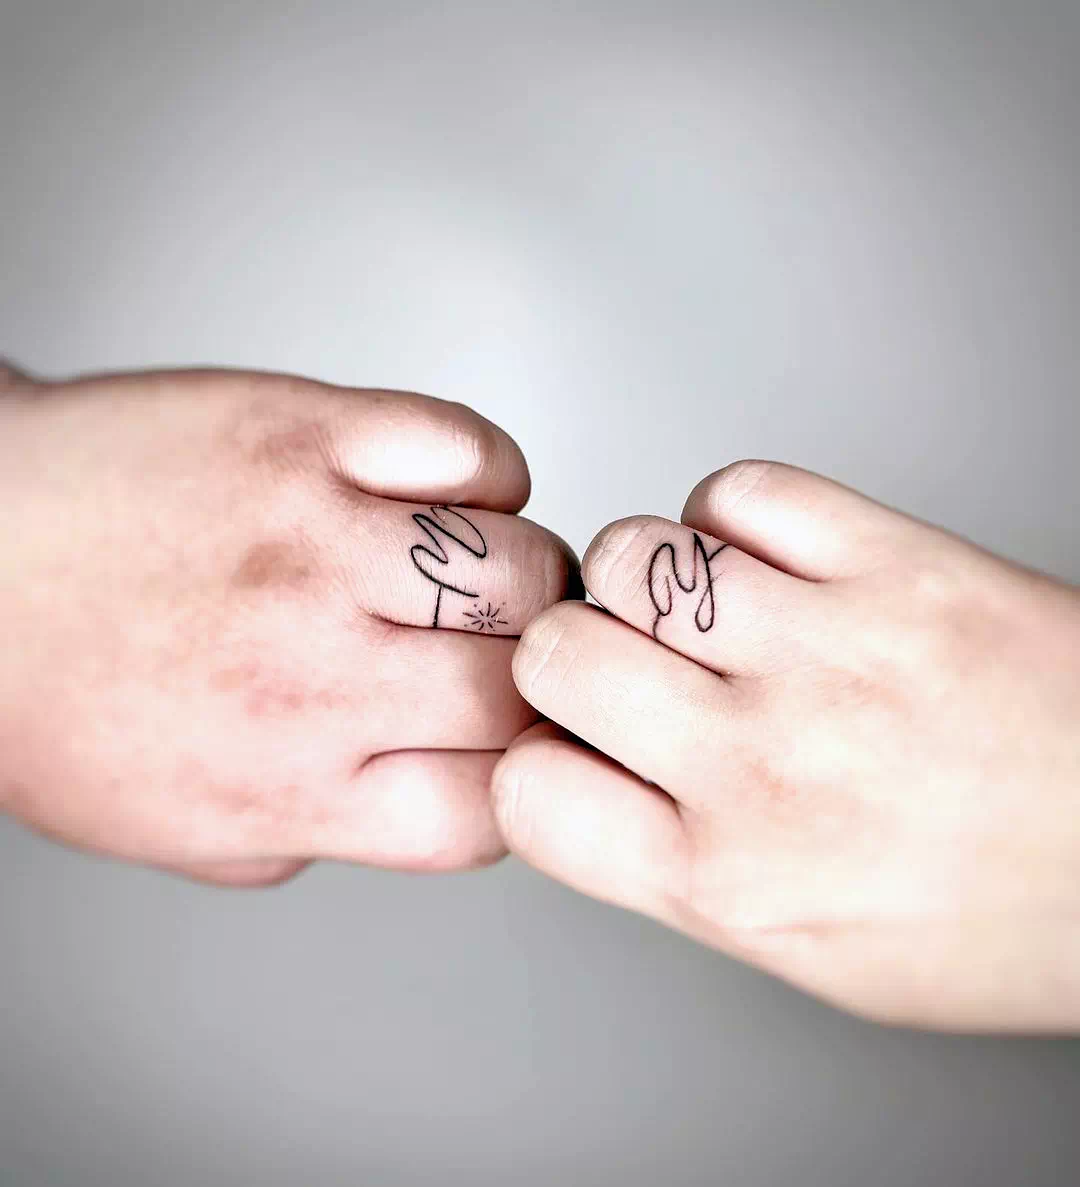 20 Unique Couple Tattoos For All The Lovers Out There! | Couple tattoos  unique, Matching tattoos, Ring finger tattoos